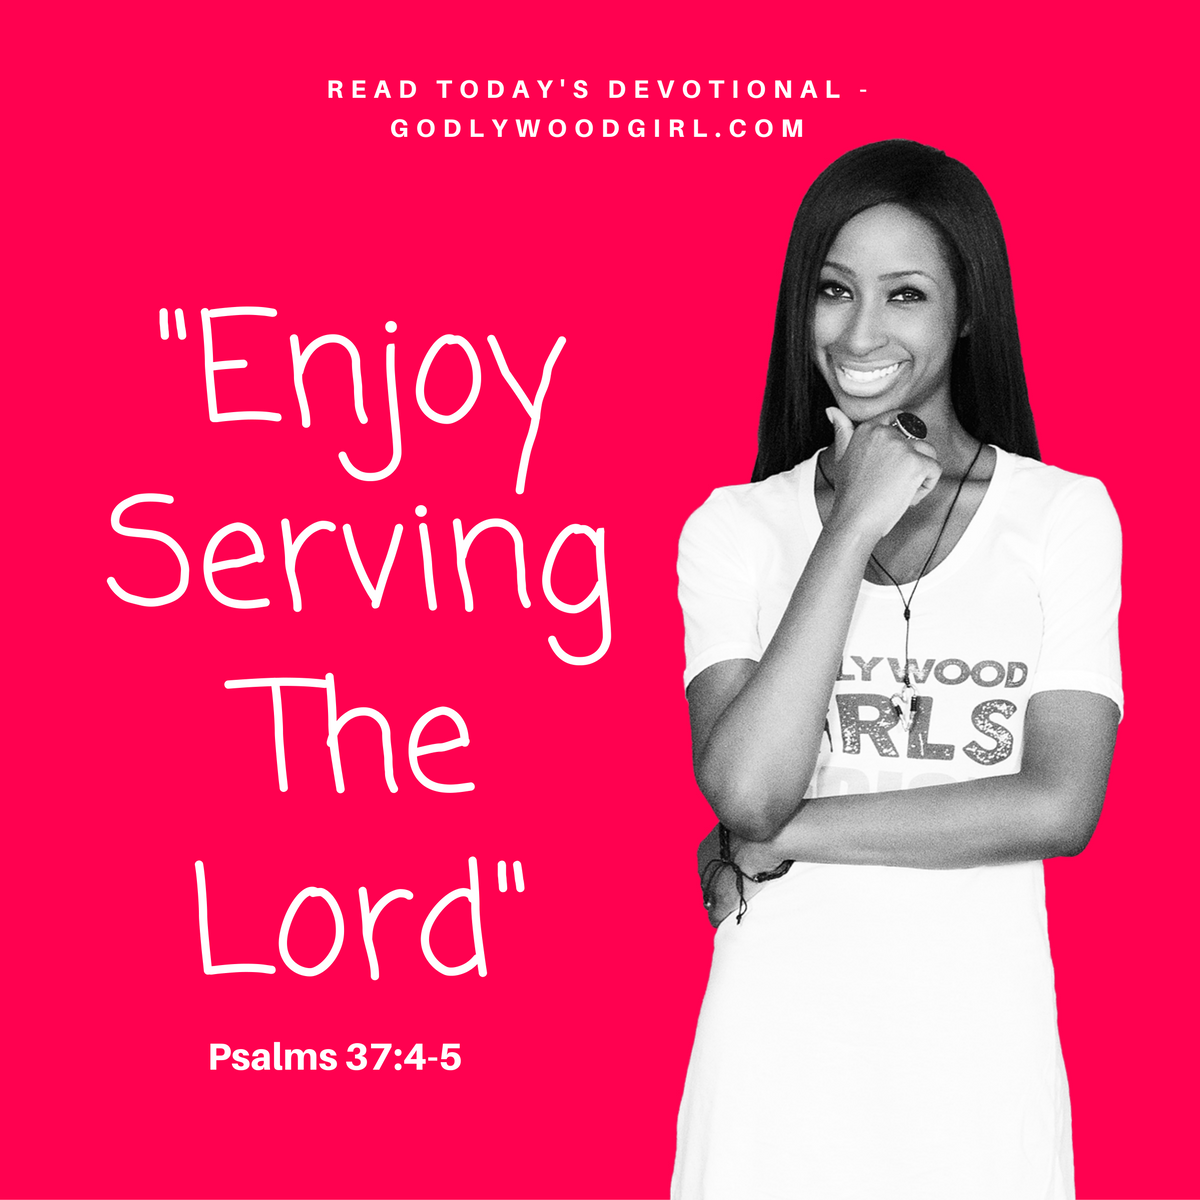 Today's Daily Devotional for Women - Enjoy Serving the Lord